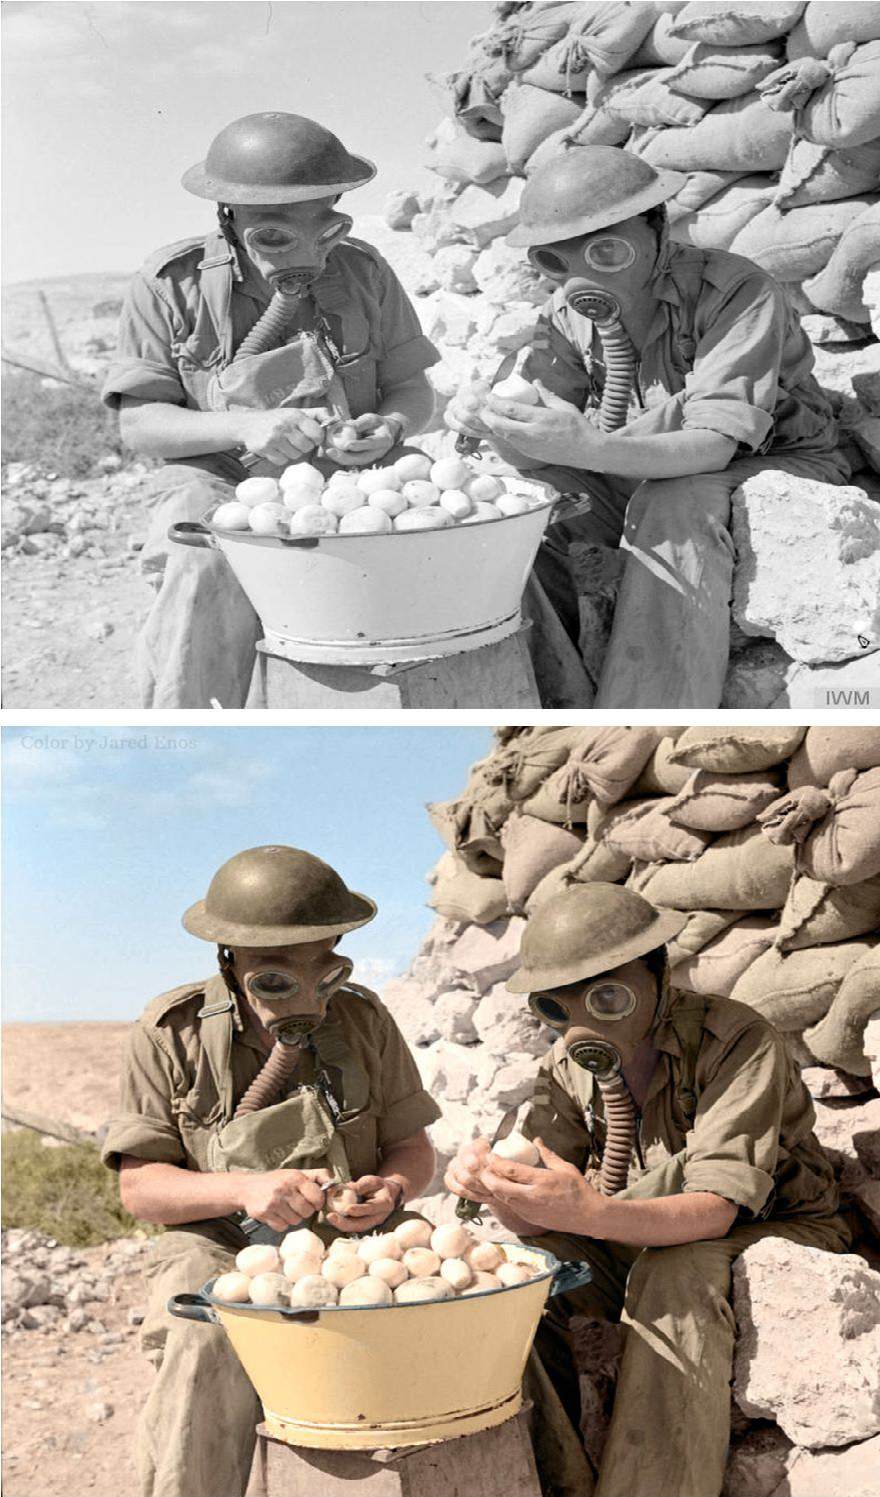 Soldiers wearing gas masks while peeling onions at Tobruk, October 15, 1941